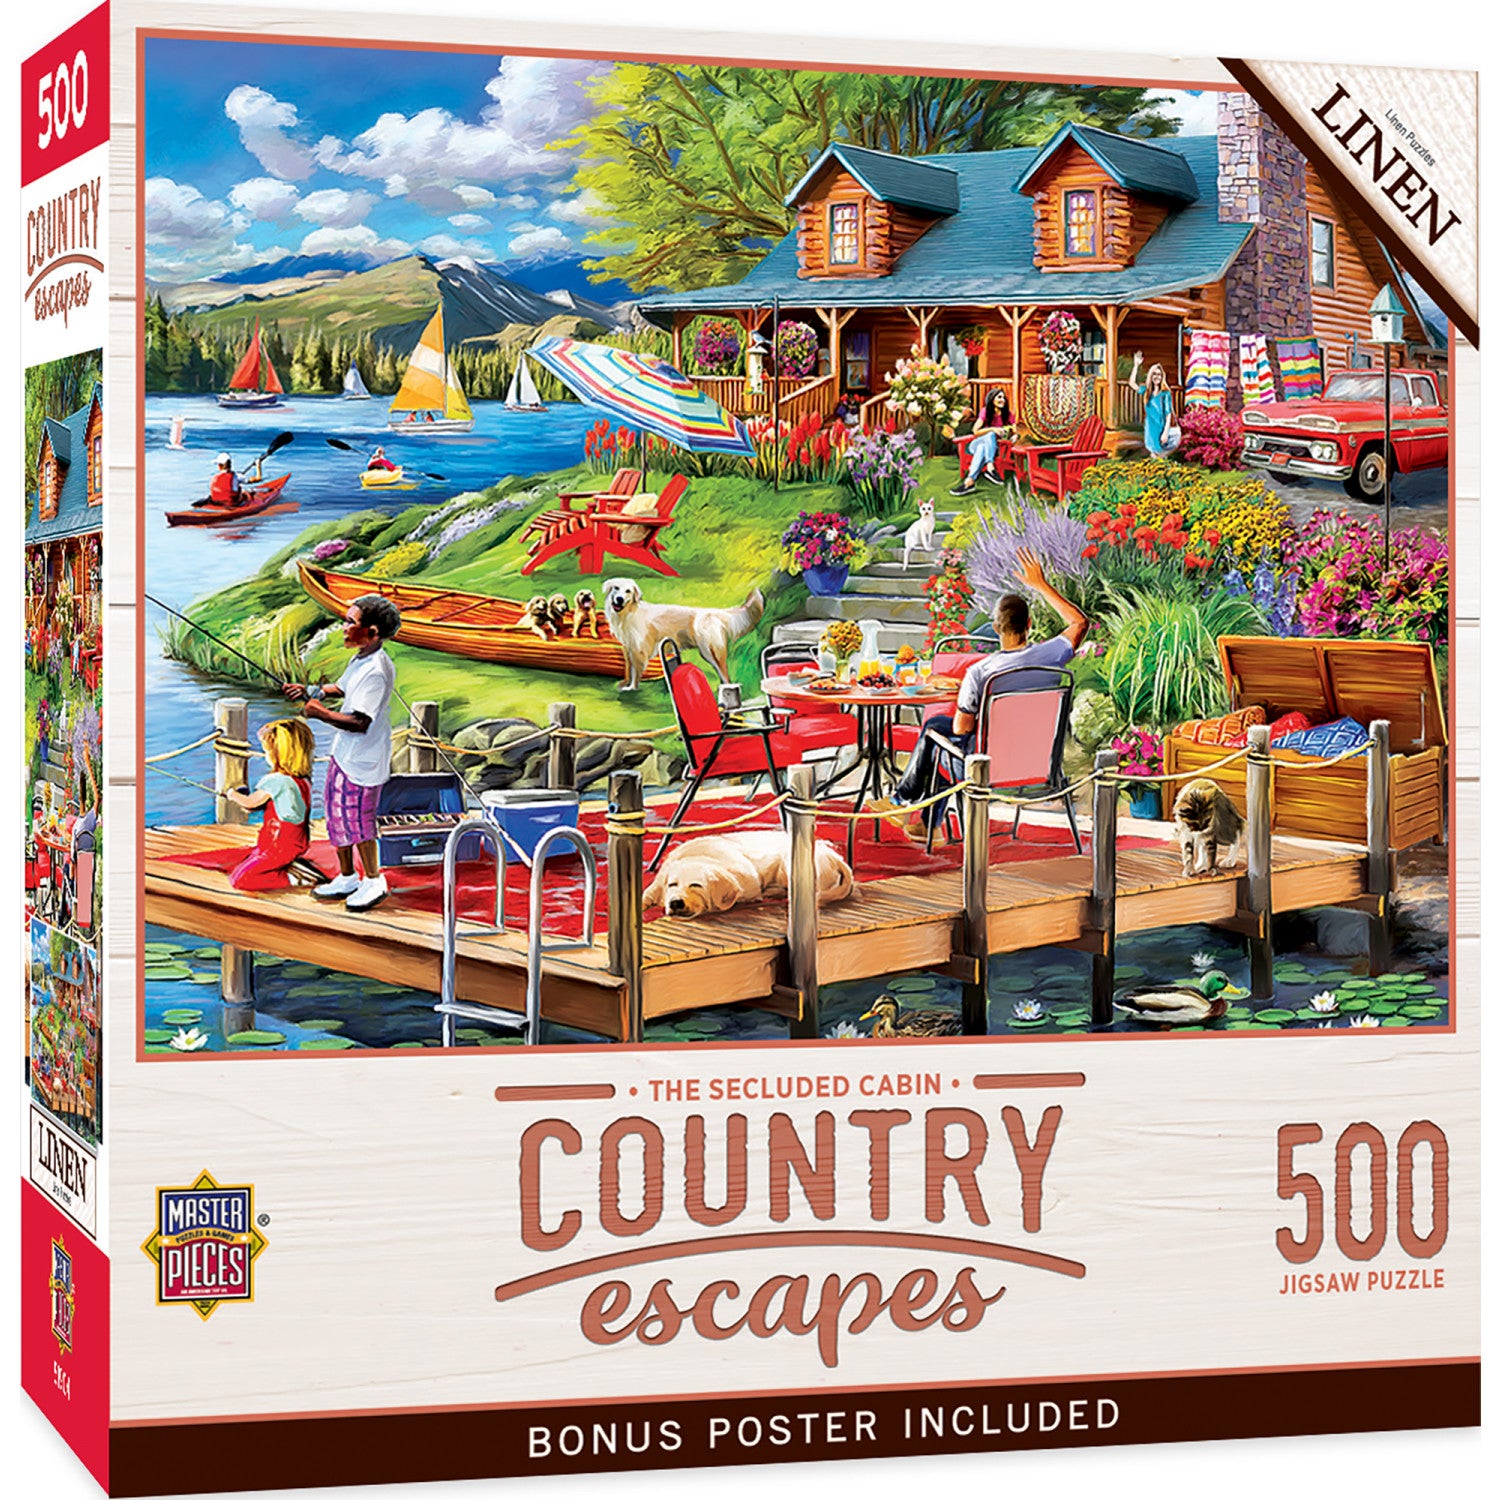 Country Escapes - The Secluded Cabin 500 Piece Jigsaw Puzzle